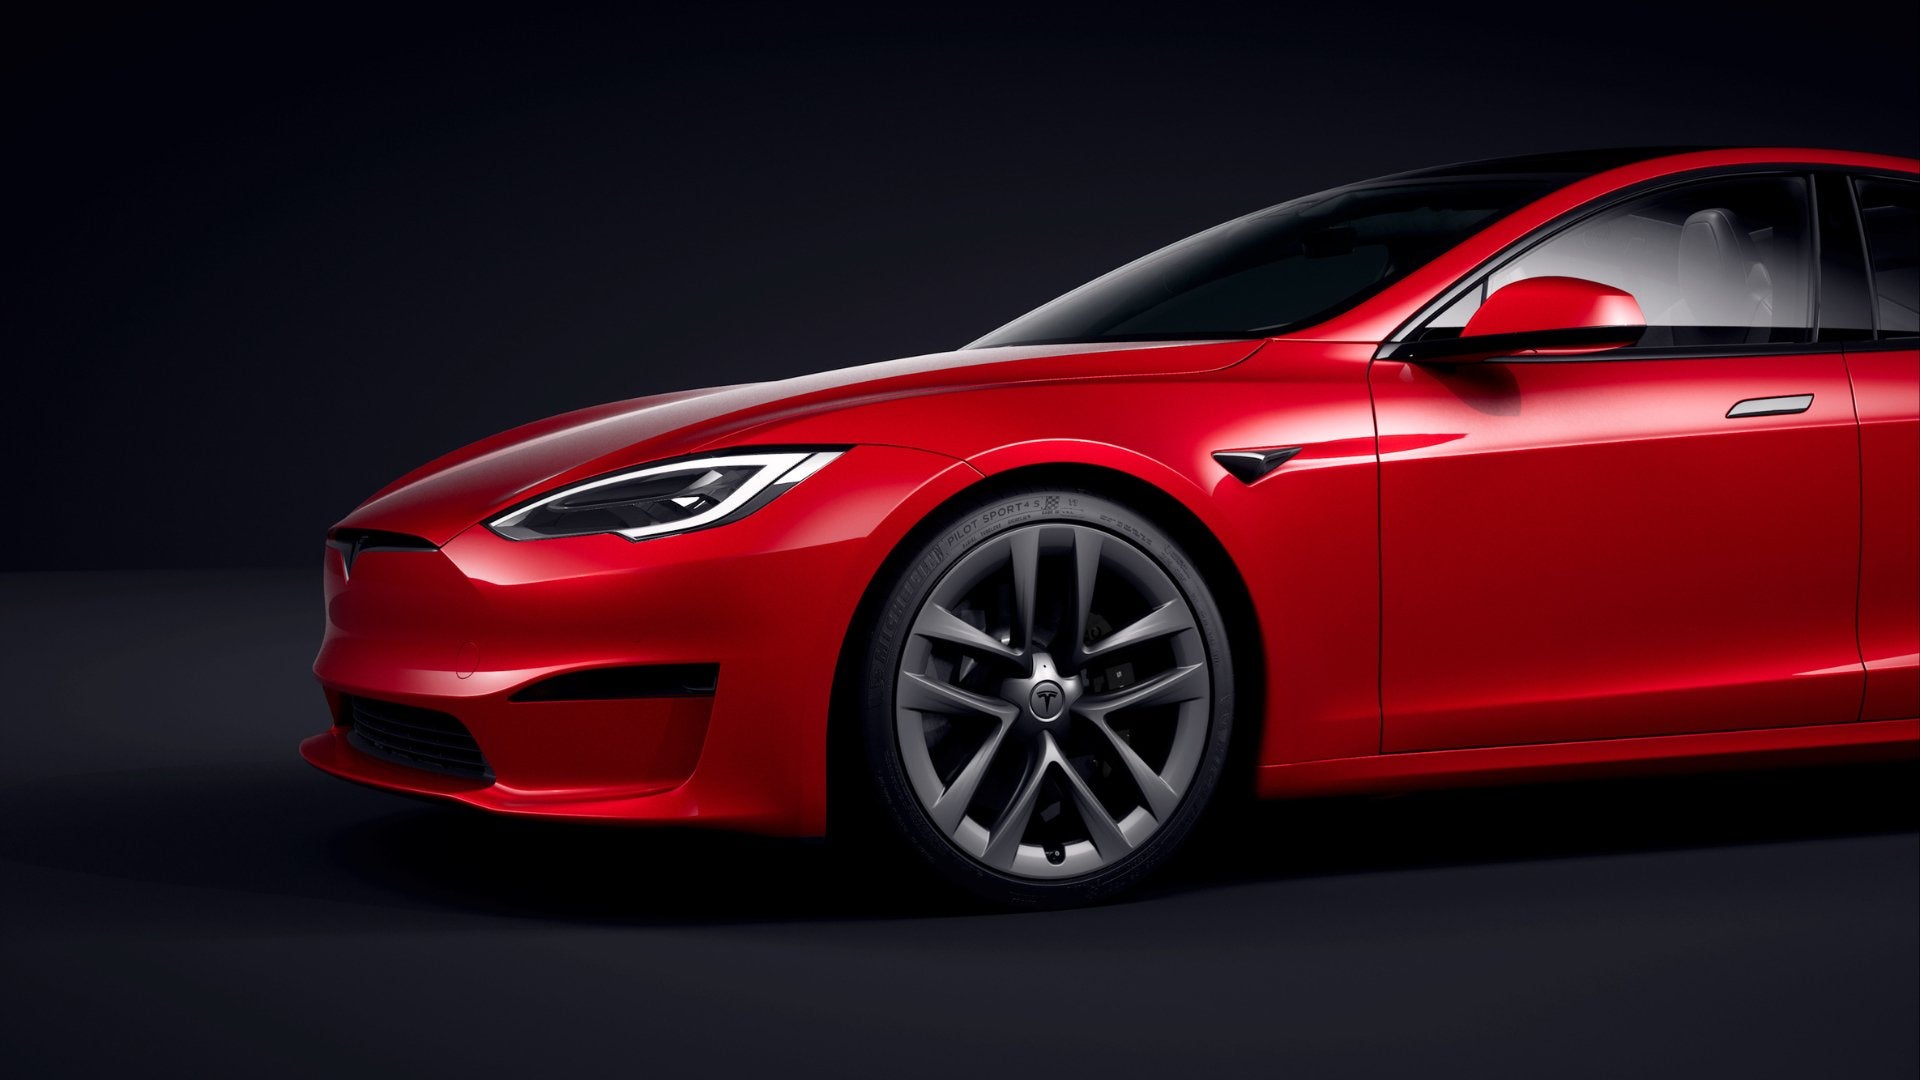 According to the latest information, Tesla Model S /X will get